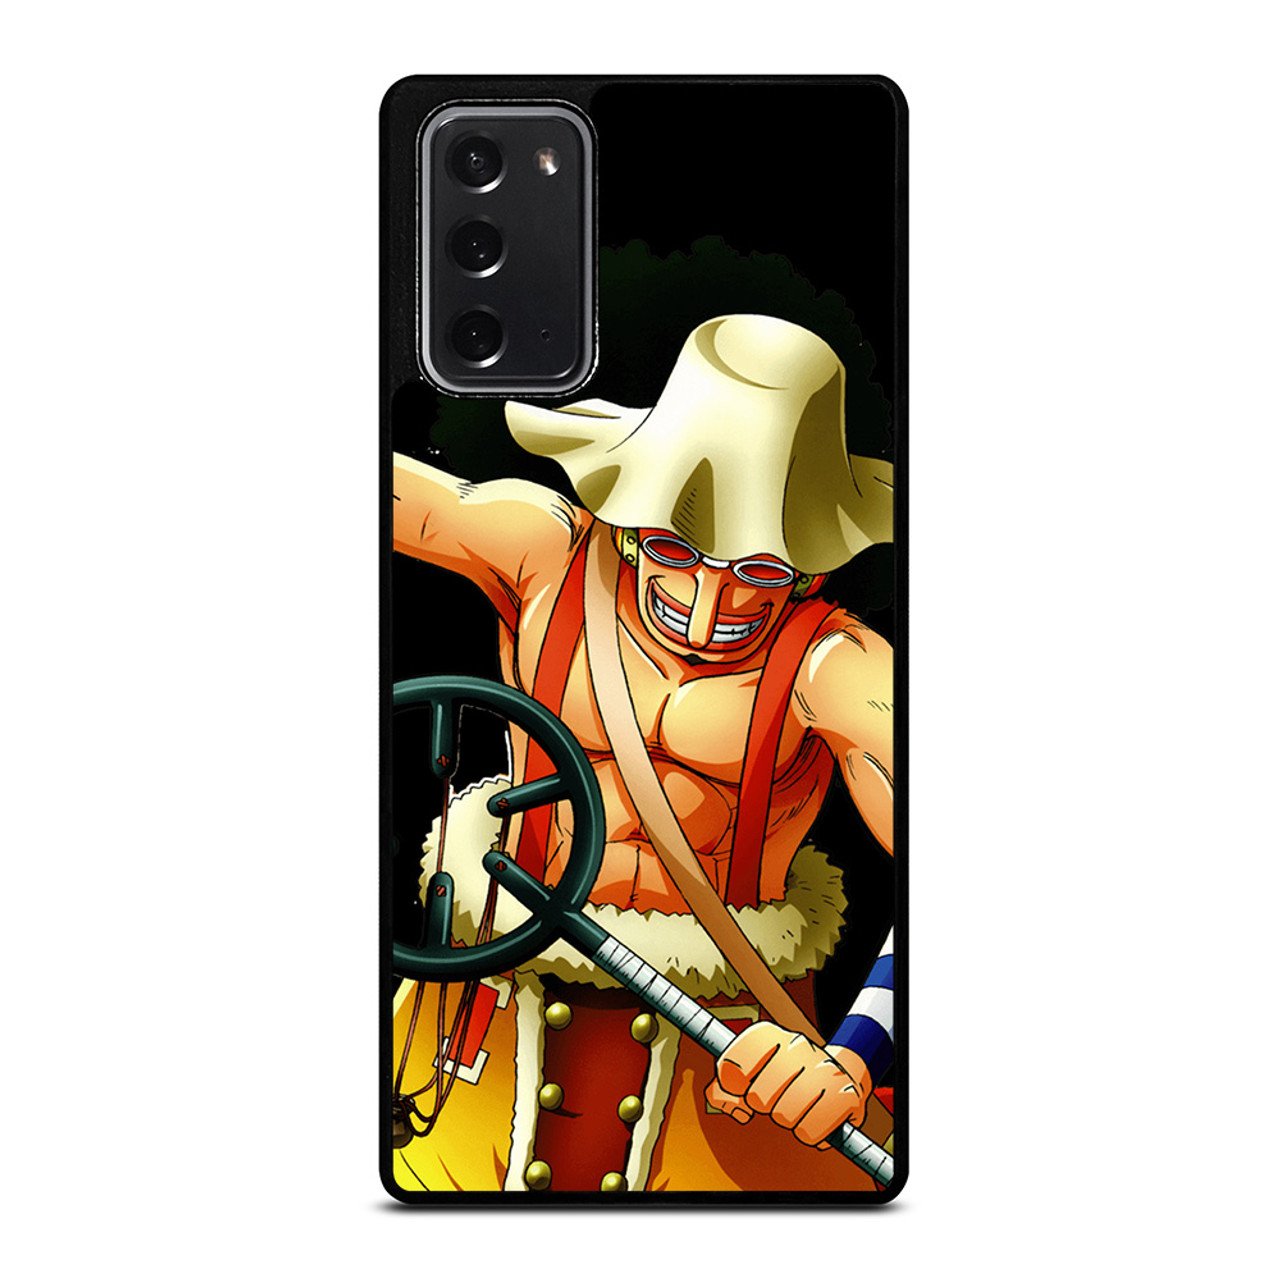 USOPP ONE PIECE ANIME Samsung Galaxy Note 20 Case Cover